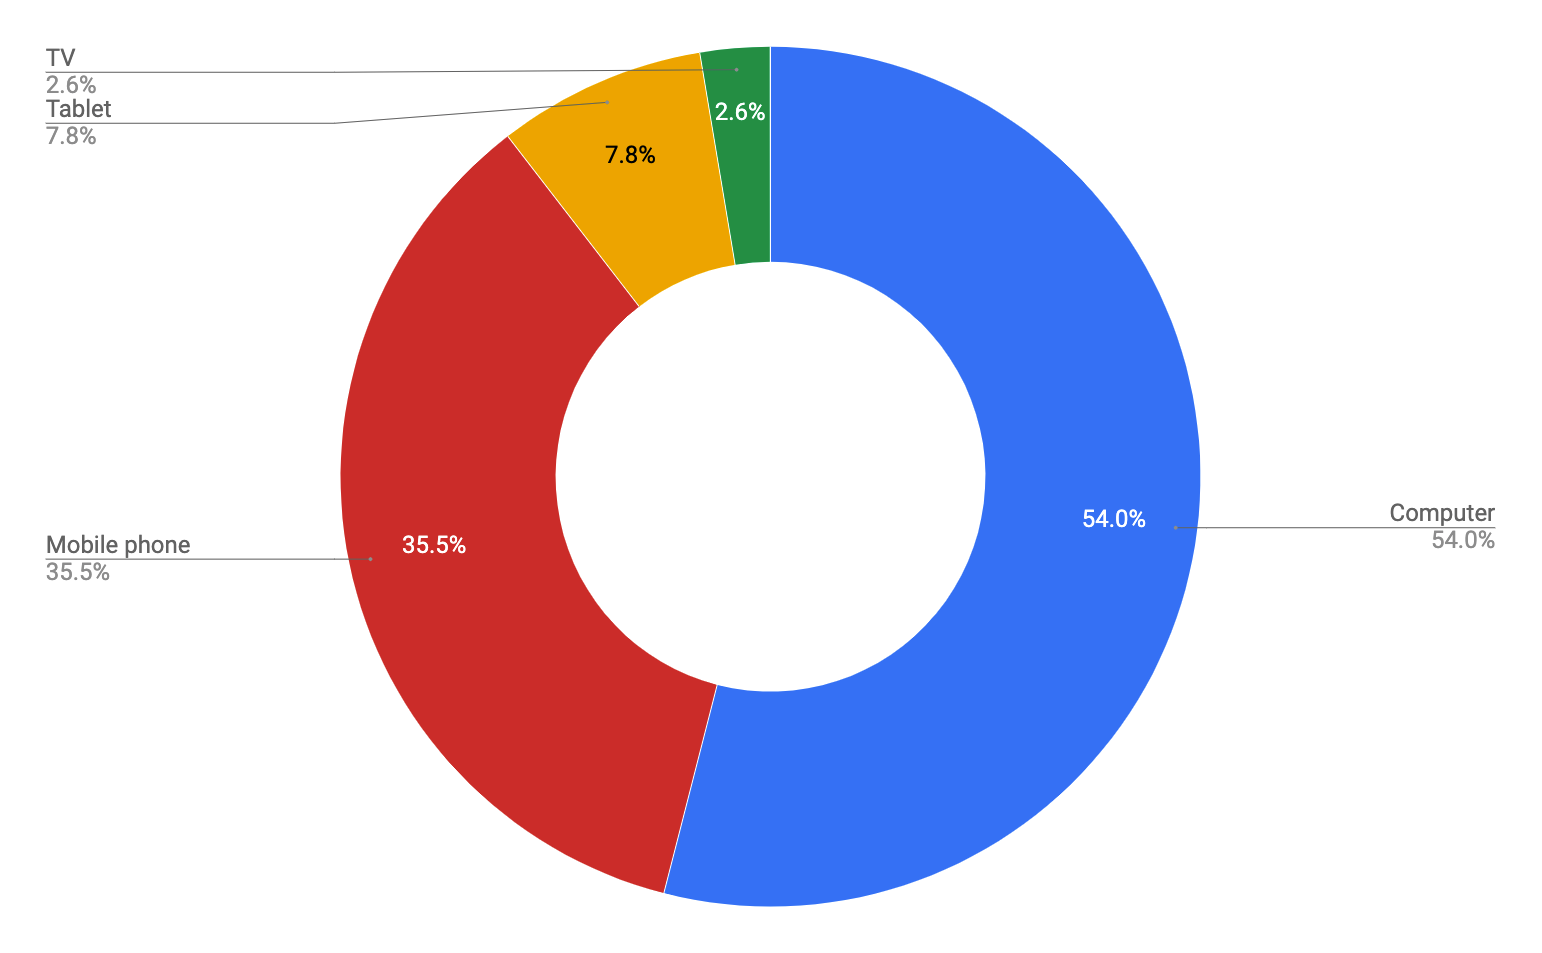 Pie chart showing devices used to view YouTube video